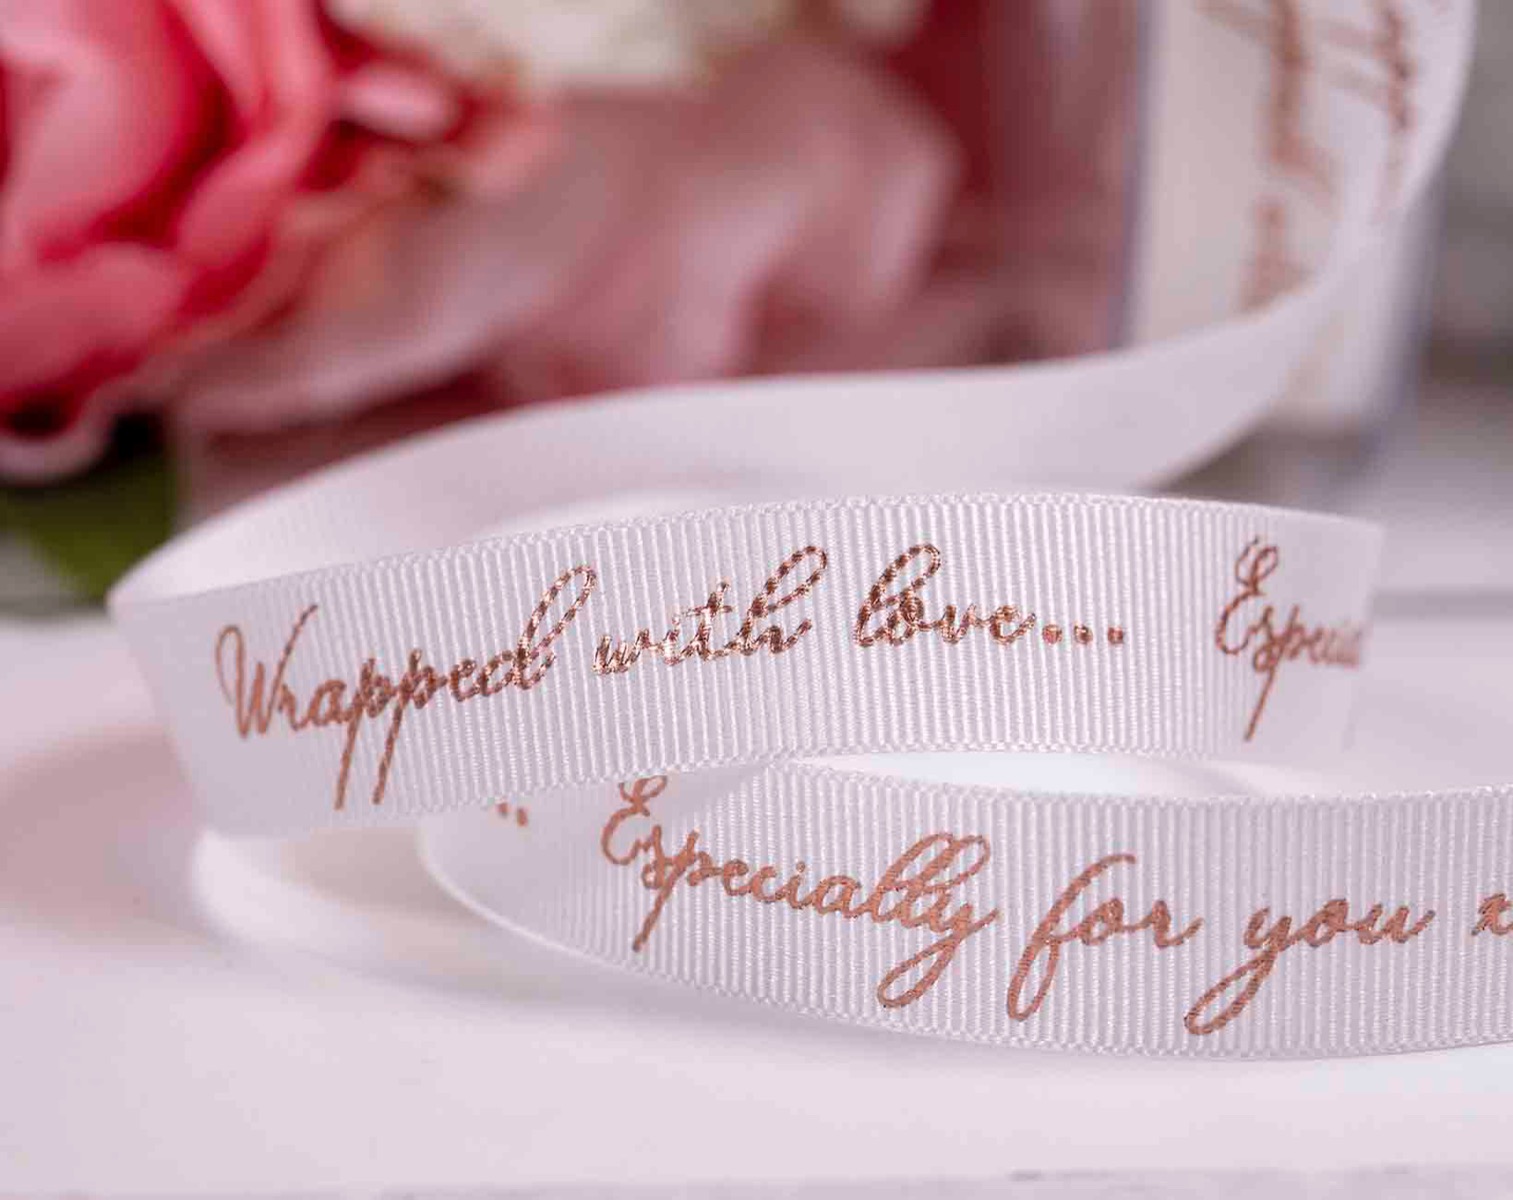 15mm whitewrapped with love ribbon